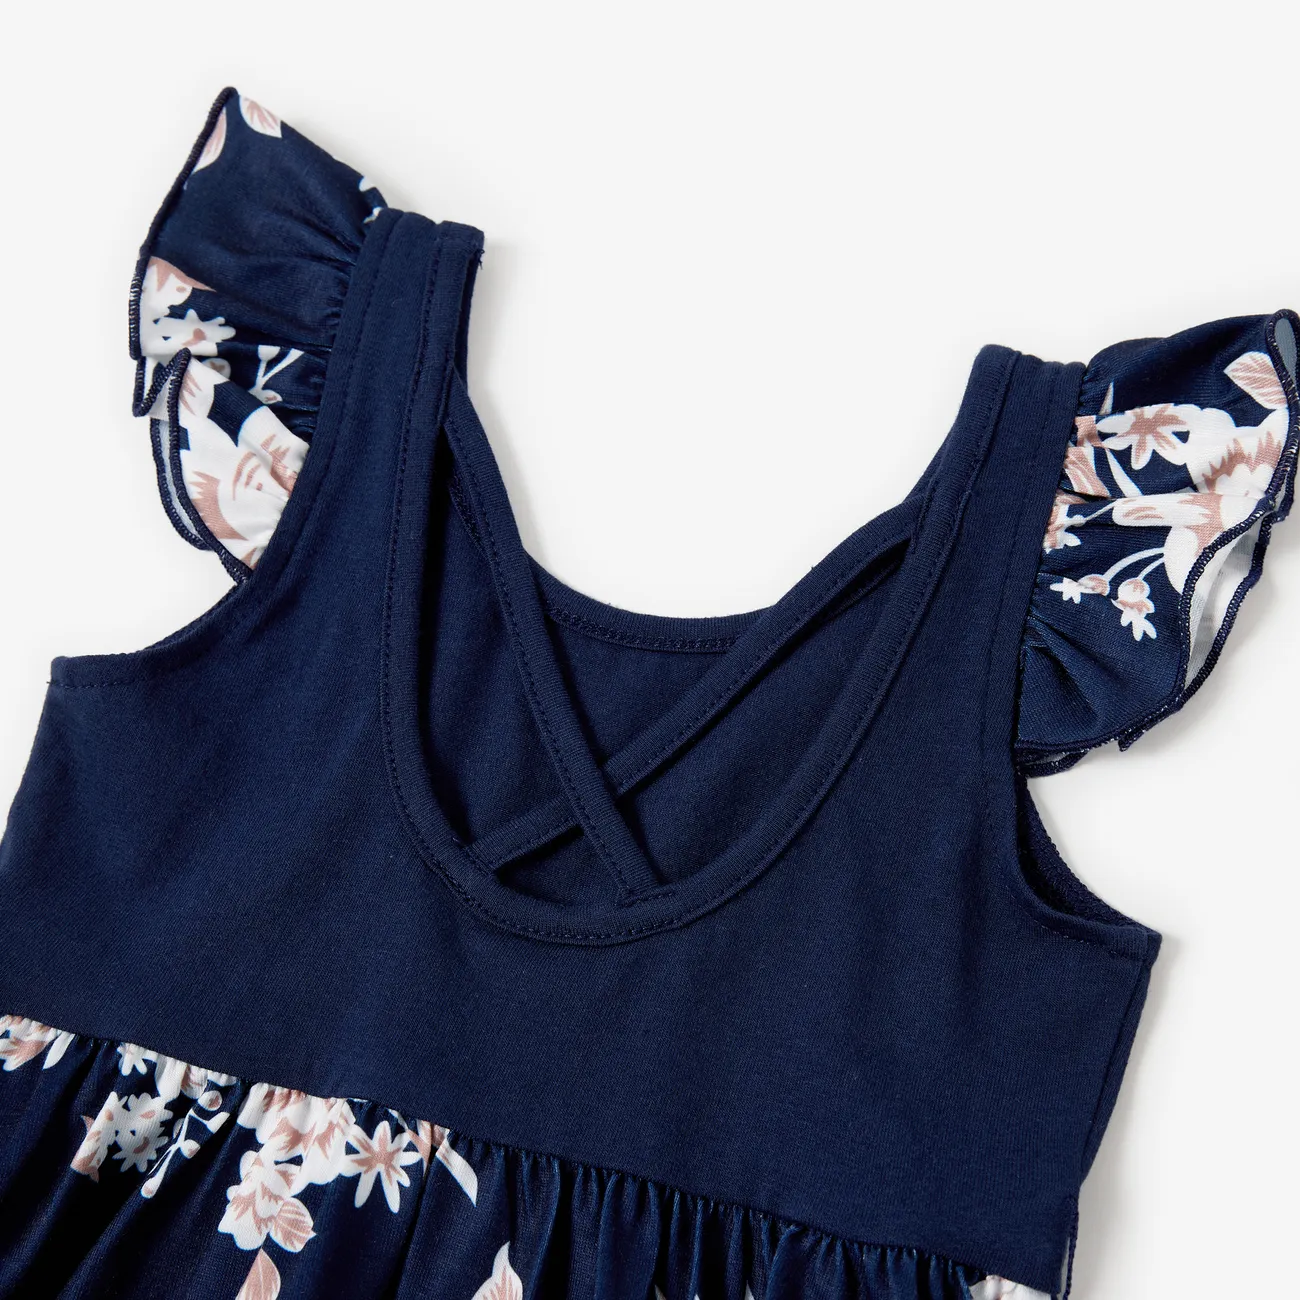 Family Matching Sets Color Block Floral Panel Tee or Tank Top Floral Print Bottom Dress Tibetanblue big image 1